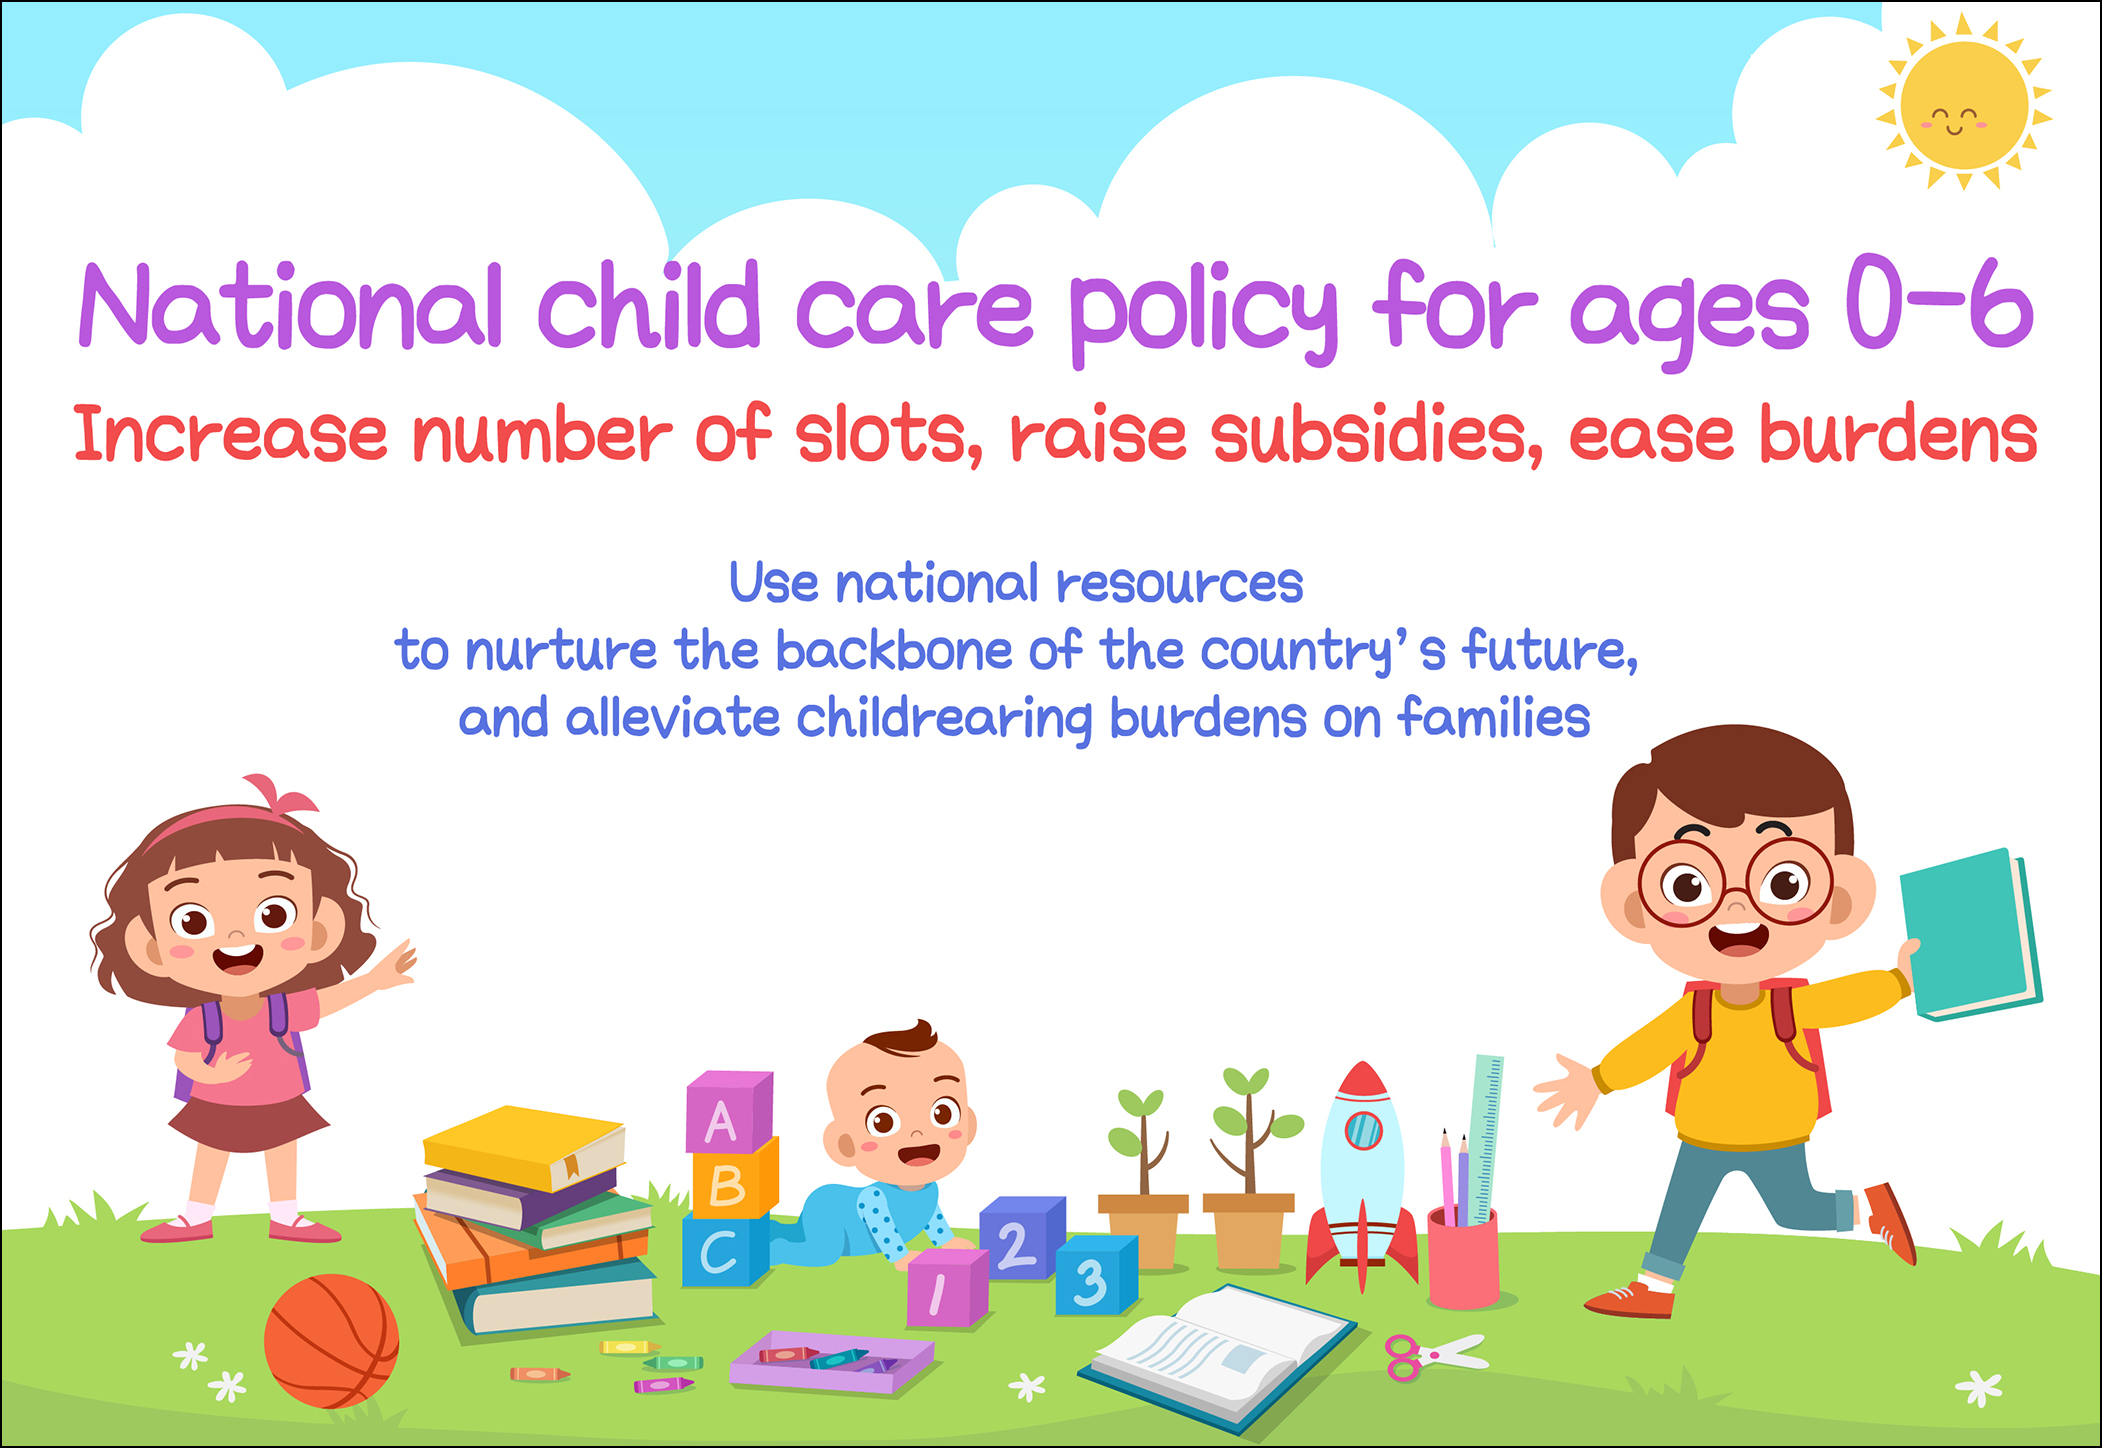 National child care policy for ages 0-6